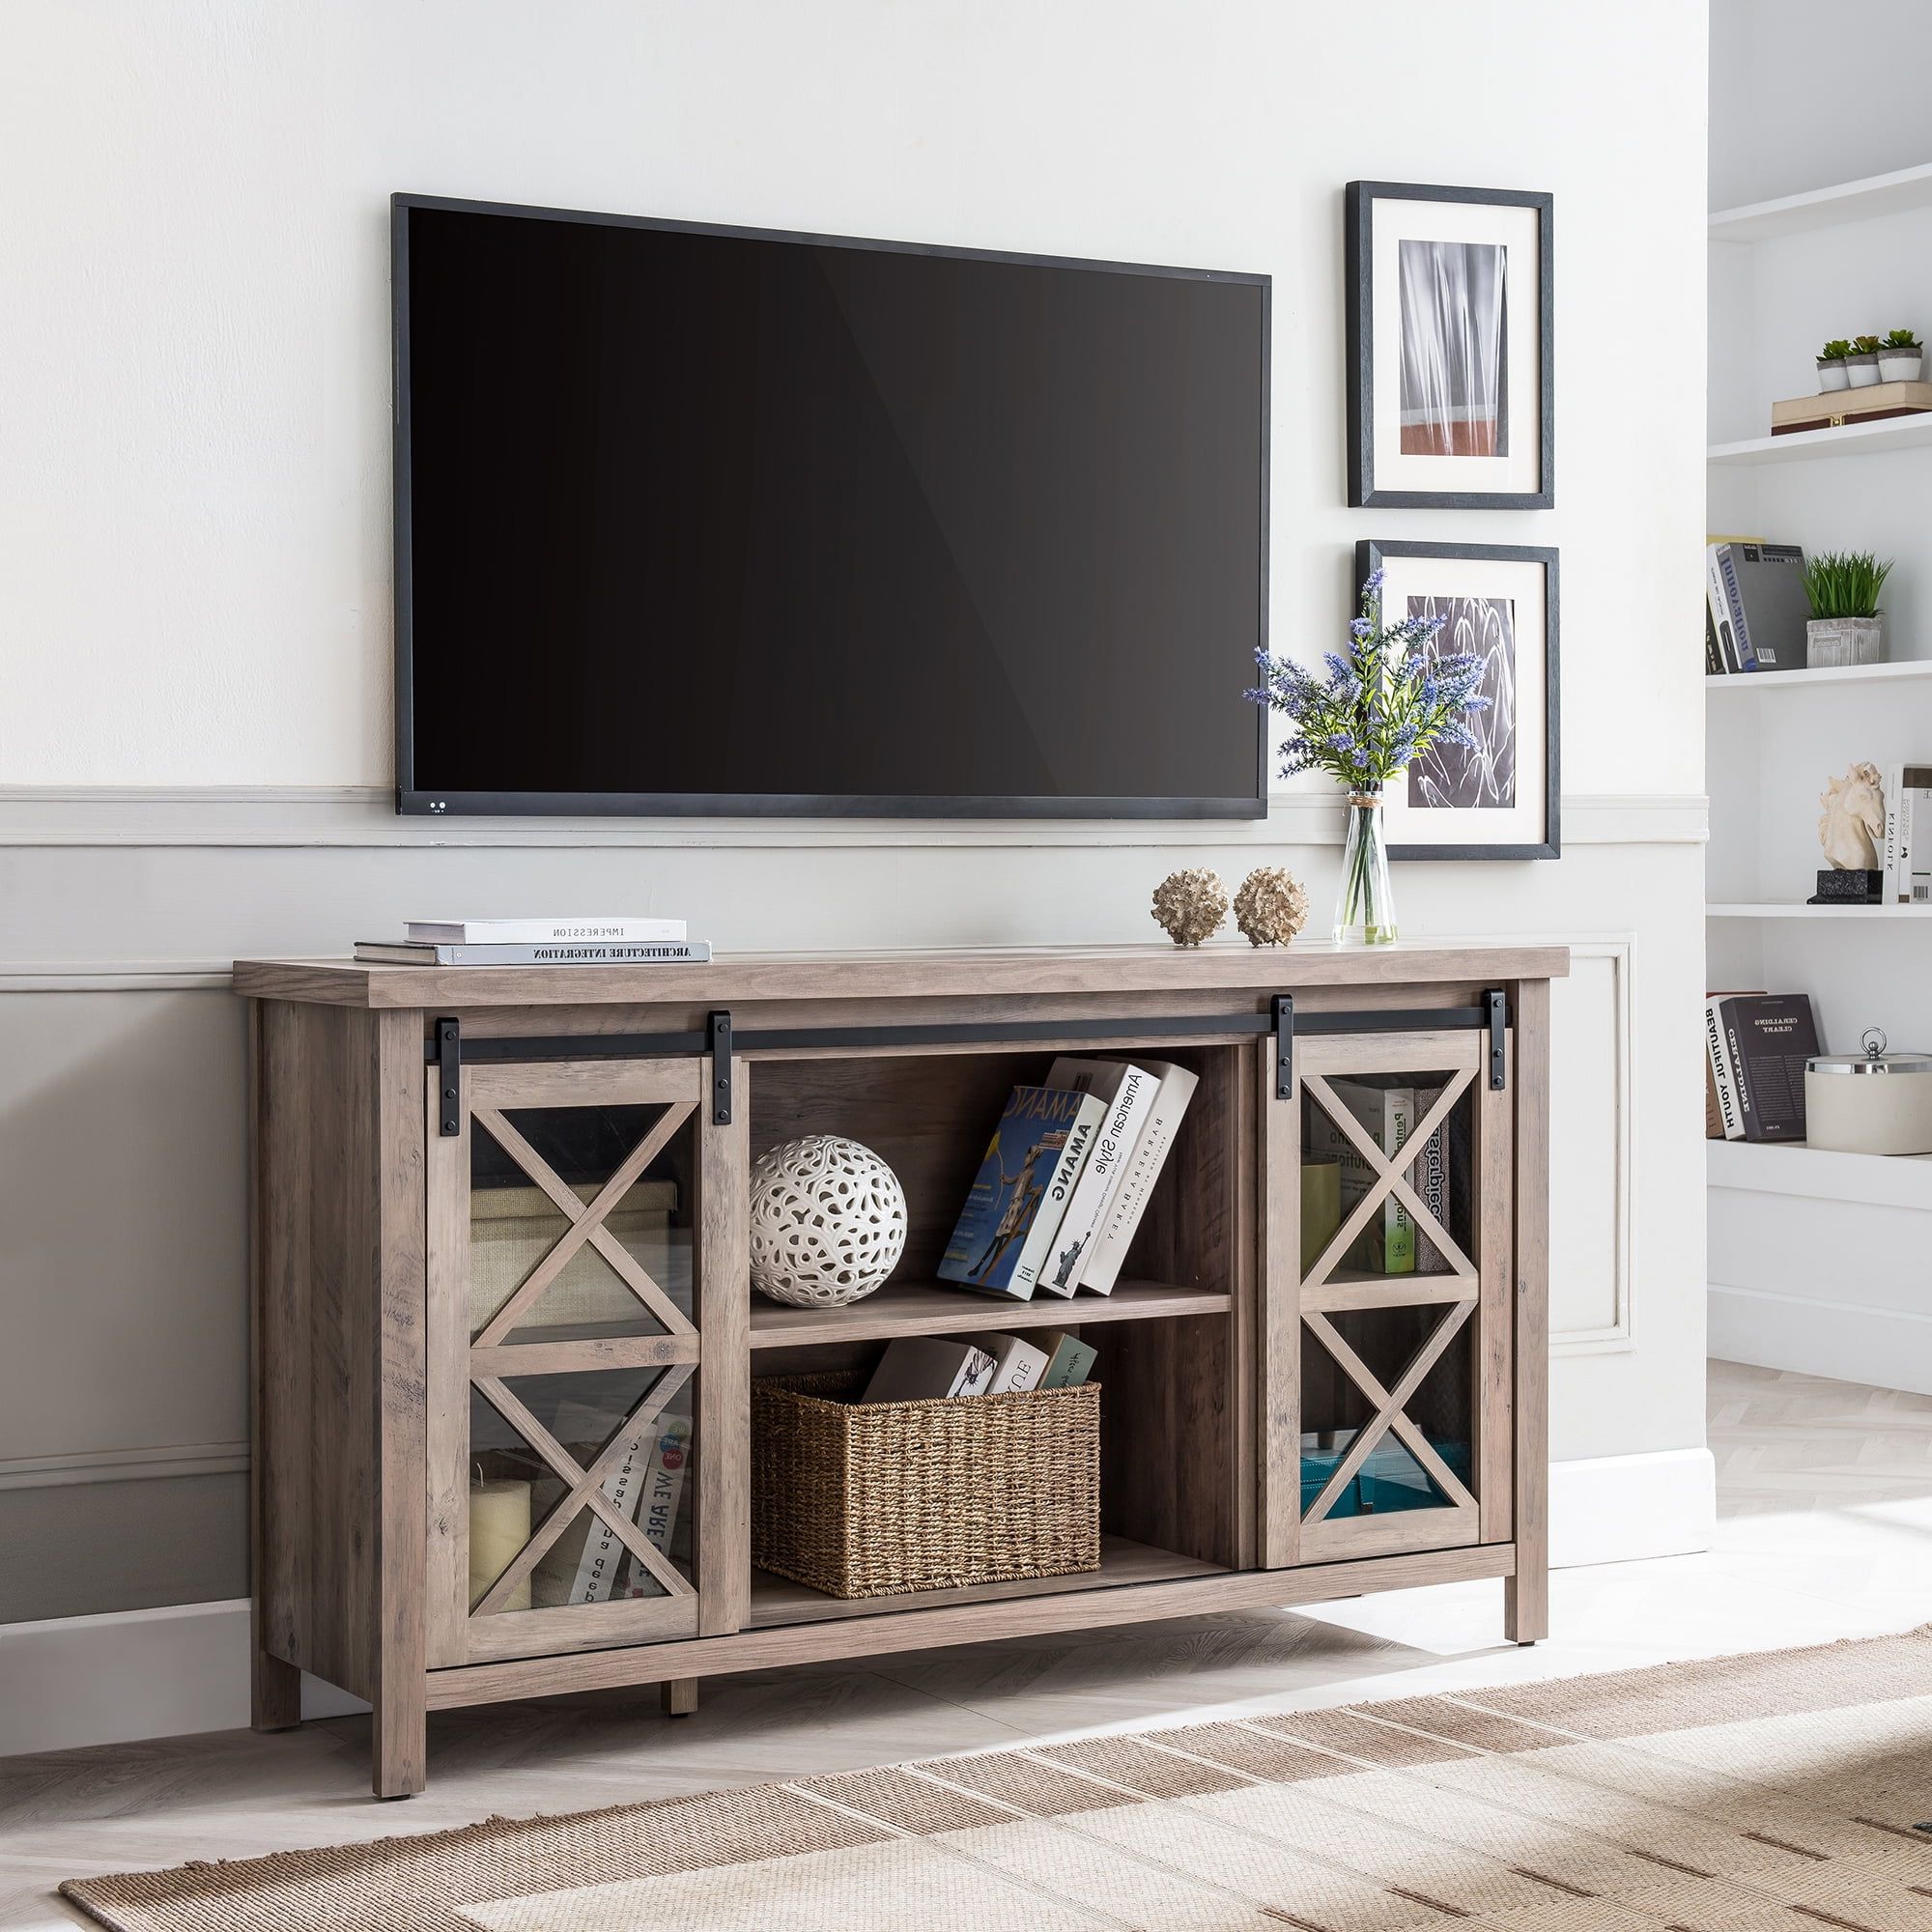 Favorite Farmhouse Stands With Shelves Pertaining To Modern Farmhouse Tv Stand For Tvs Up To 58", Media Console Table With (View 4 of 15)